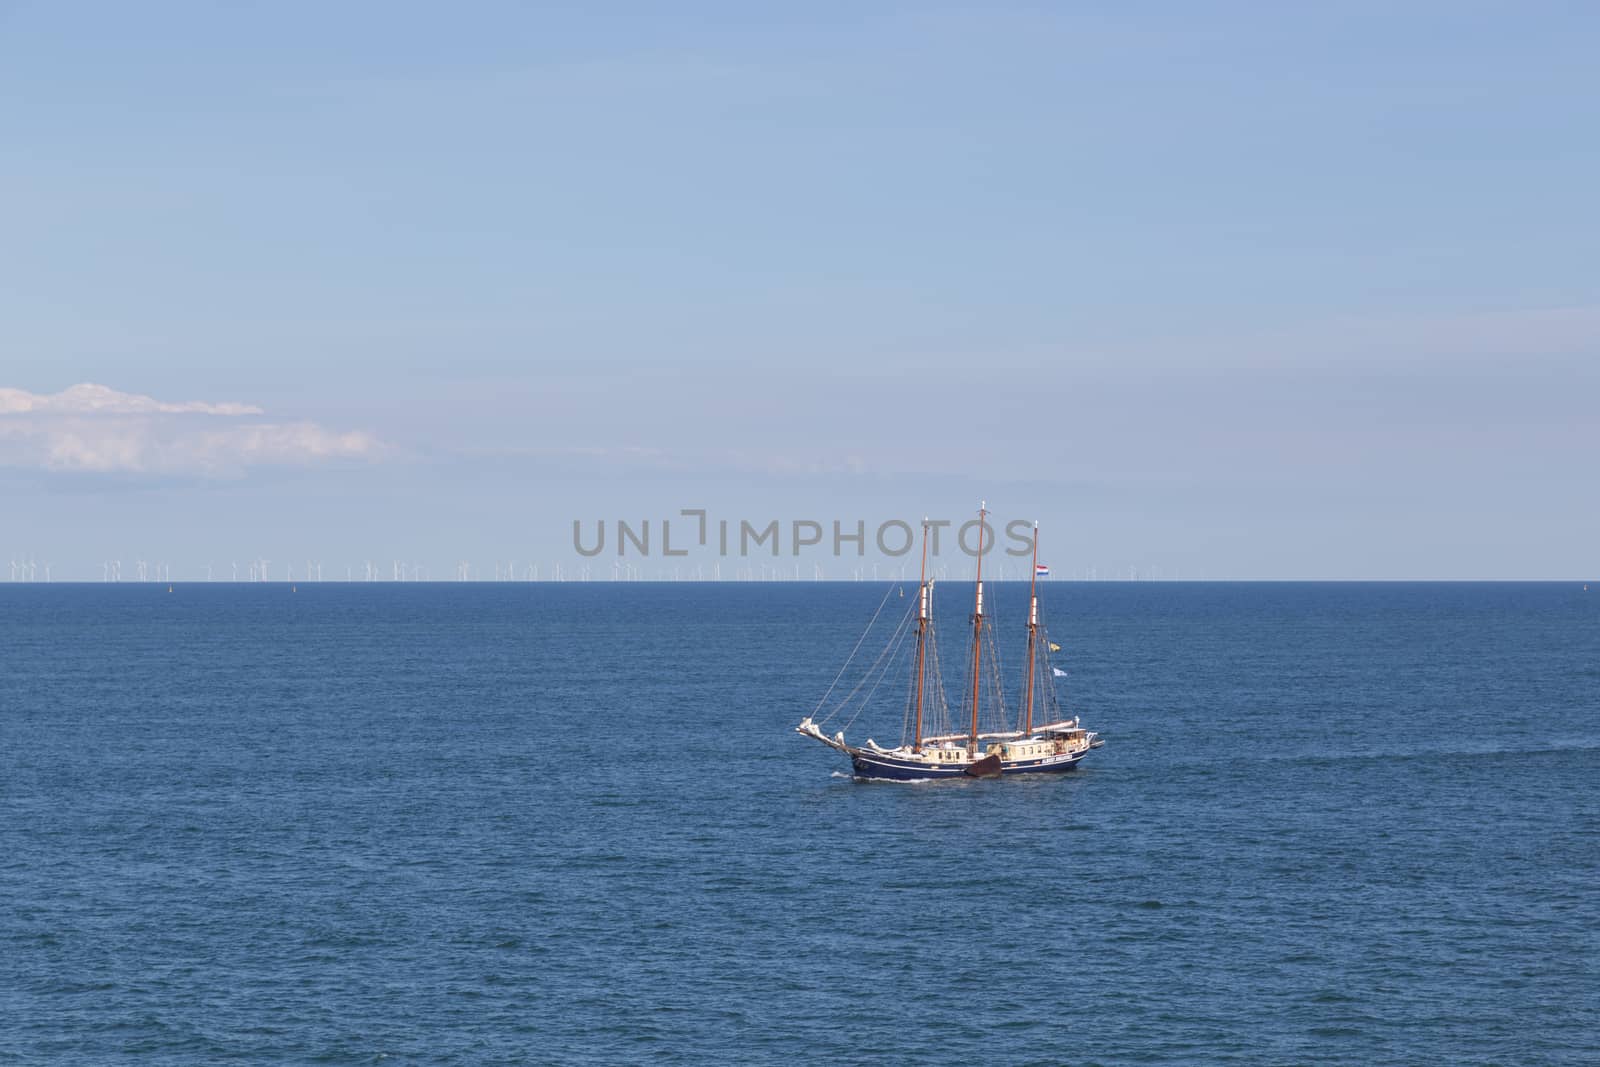 At Sea, Baltic Sea - July 26, 2016: A sailboat in the Baltic Sea between Puttgarden in Germany and Rodby in Denmark